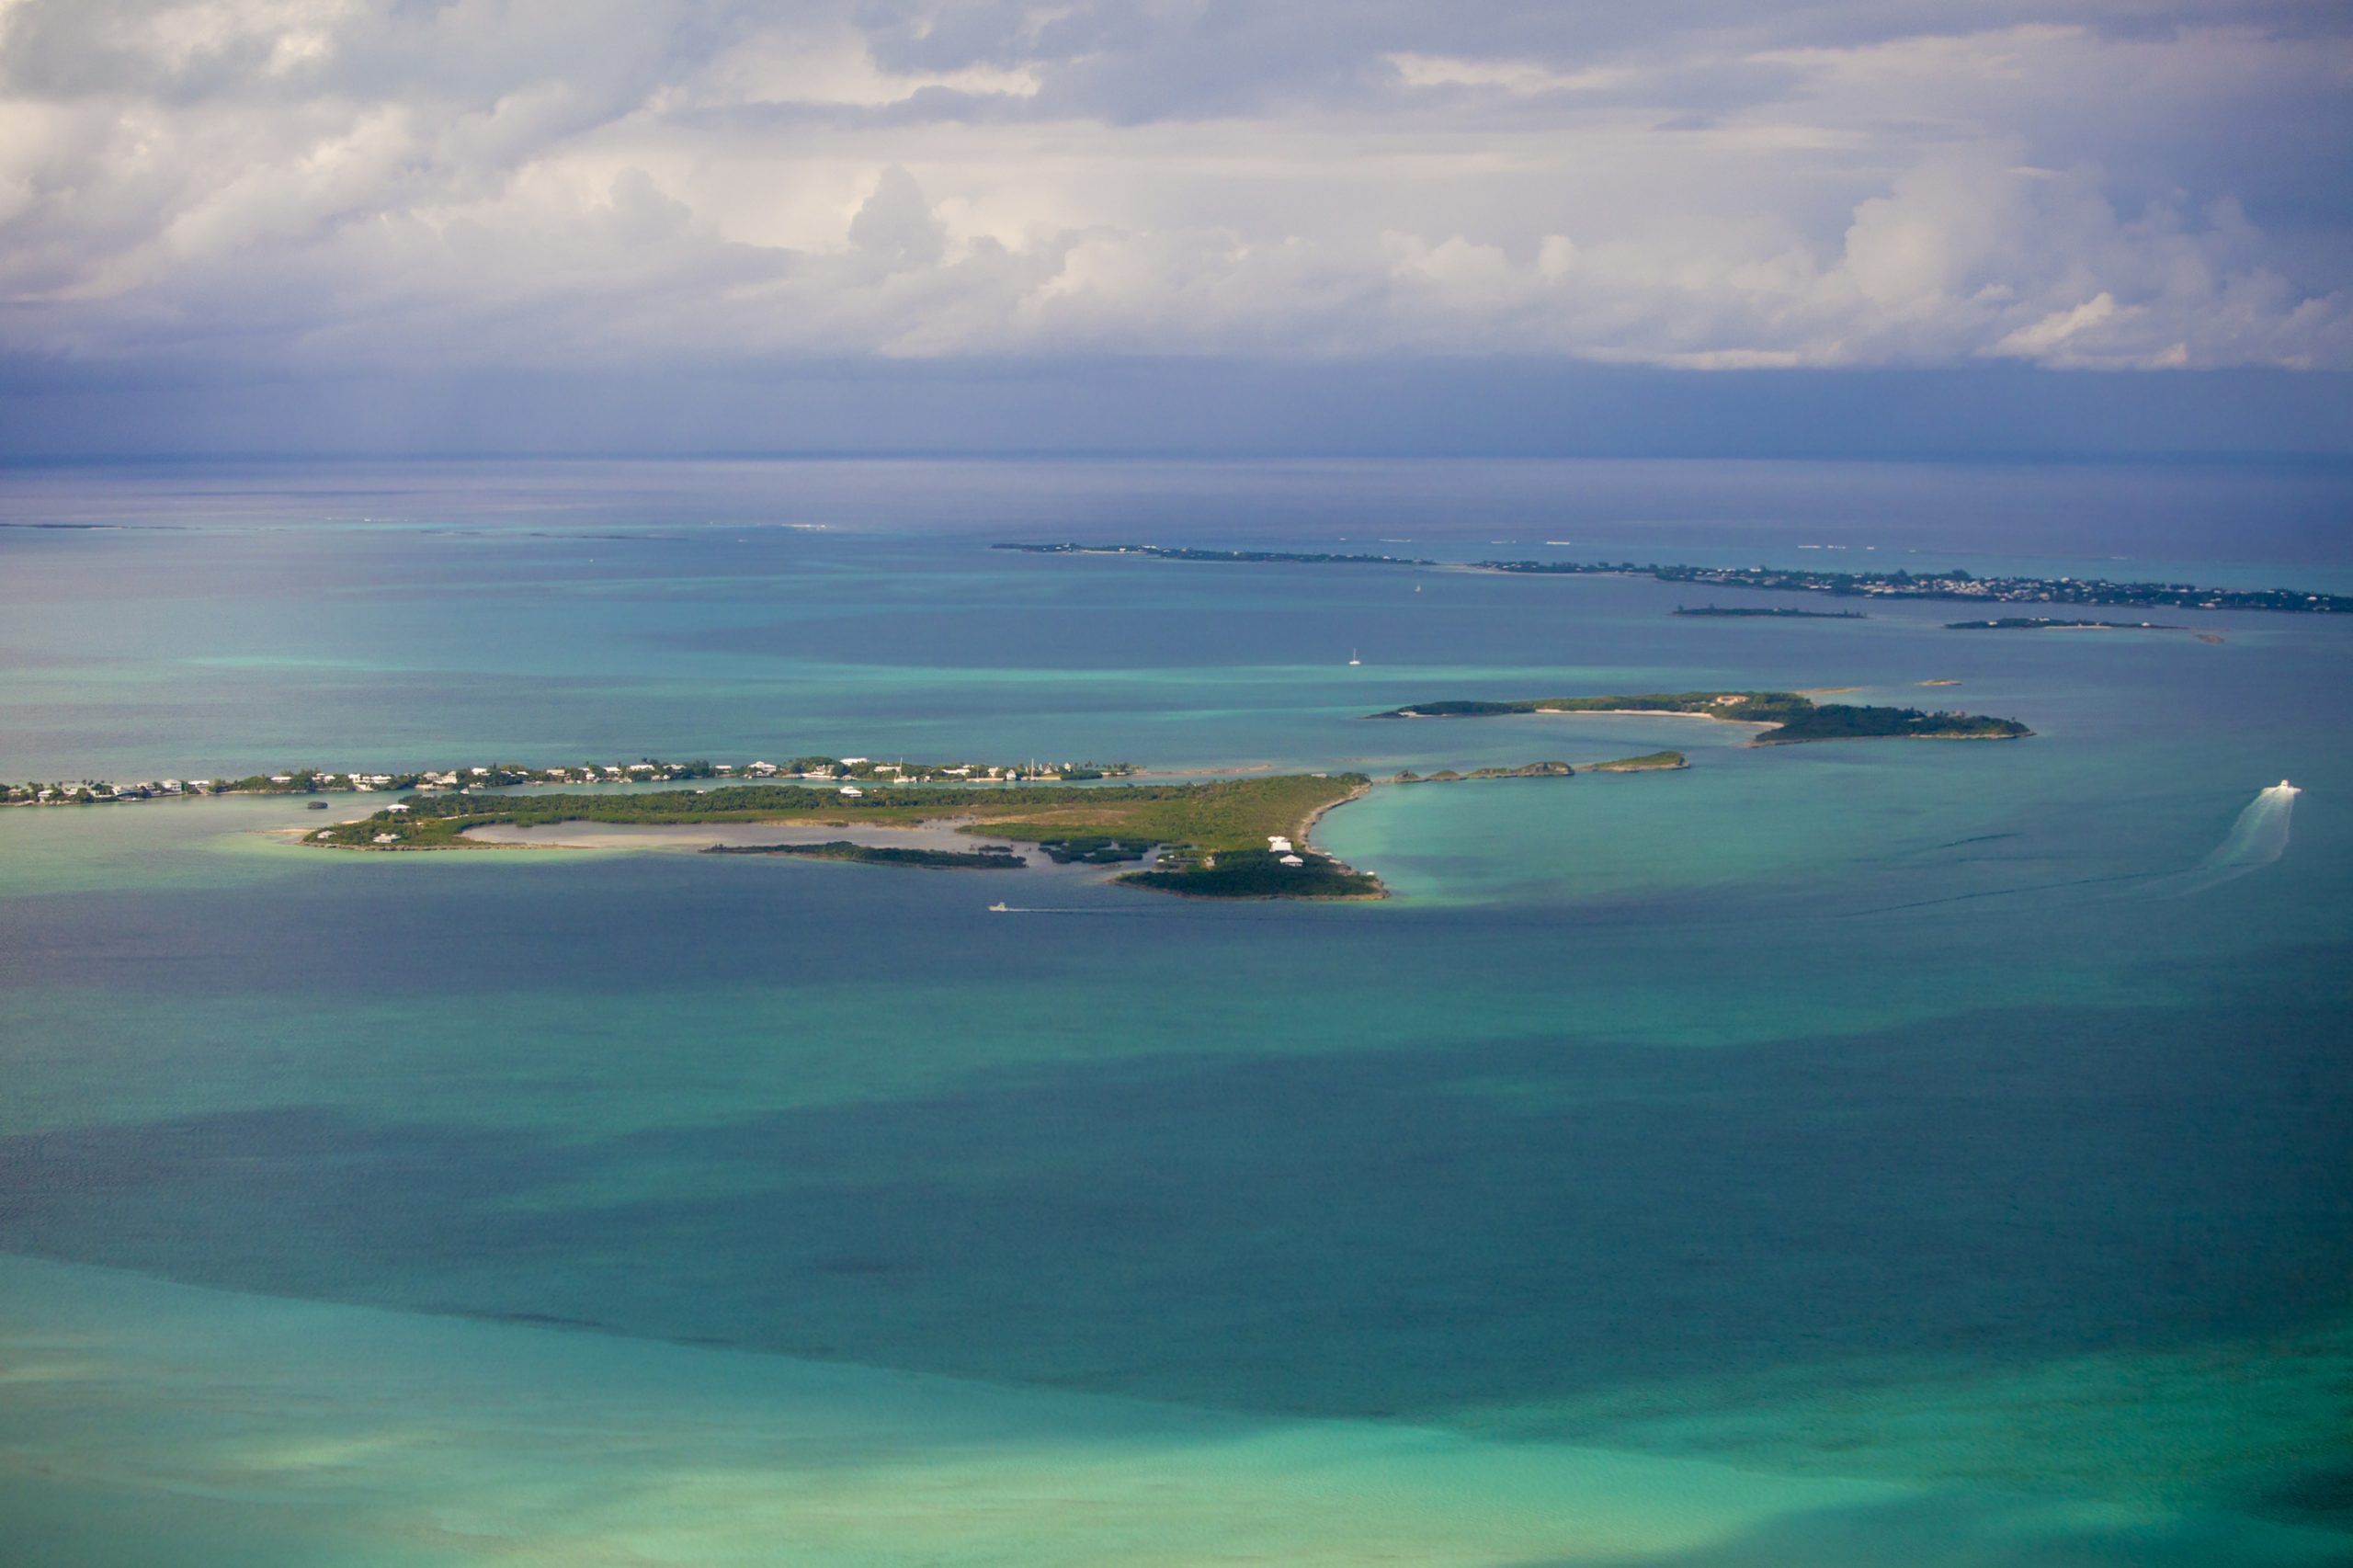 Best Popular Snorkeling Spots in The Abacos, Bahamas